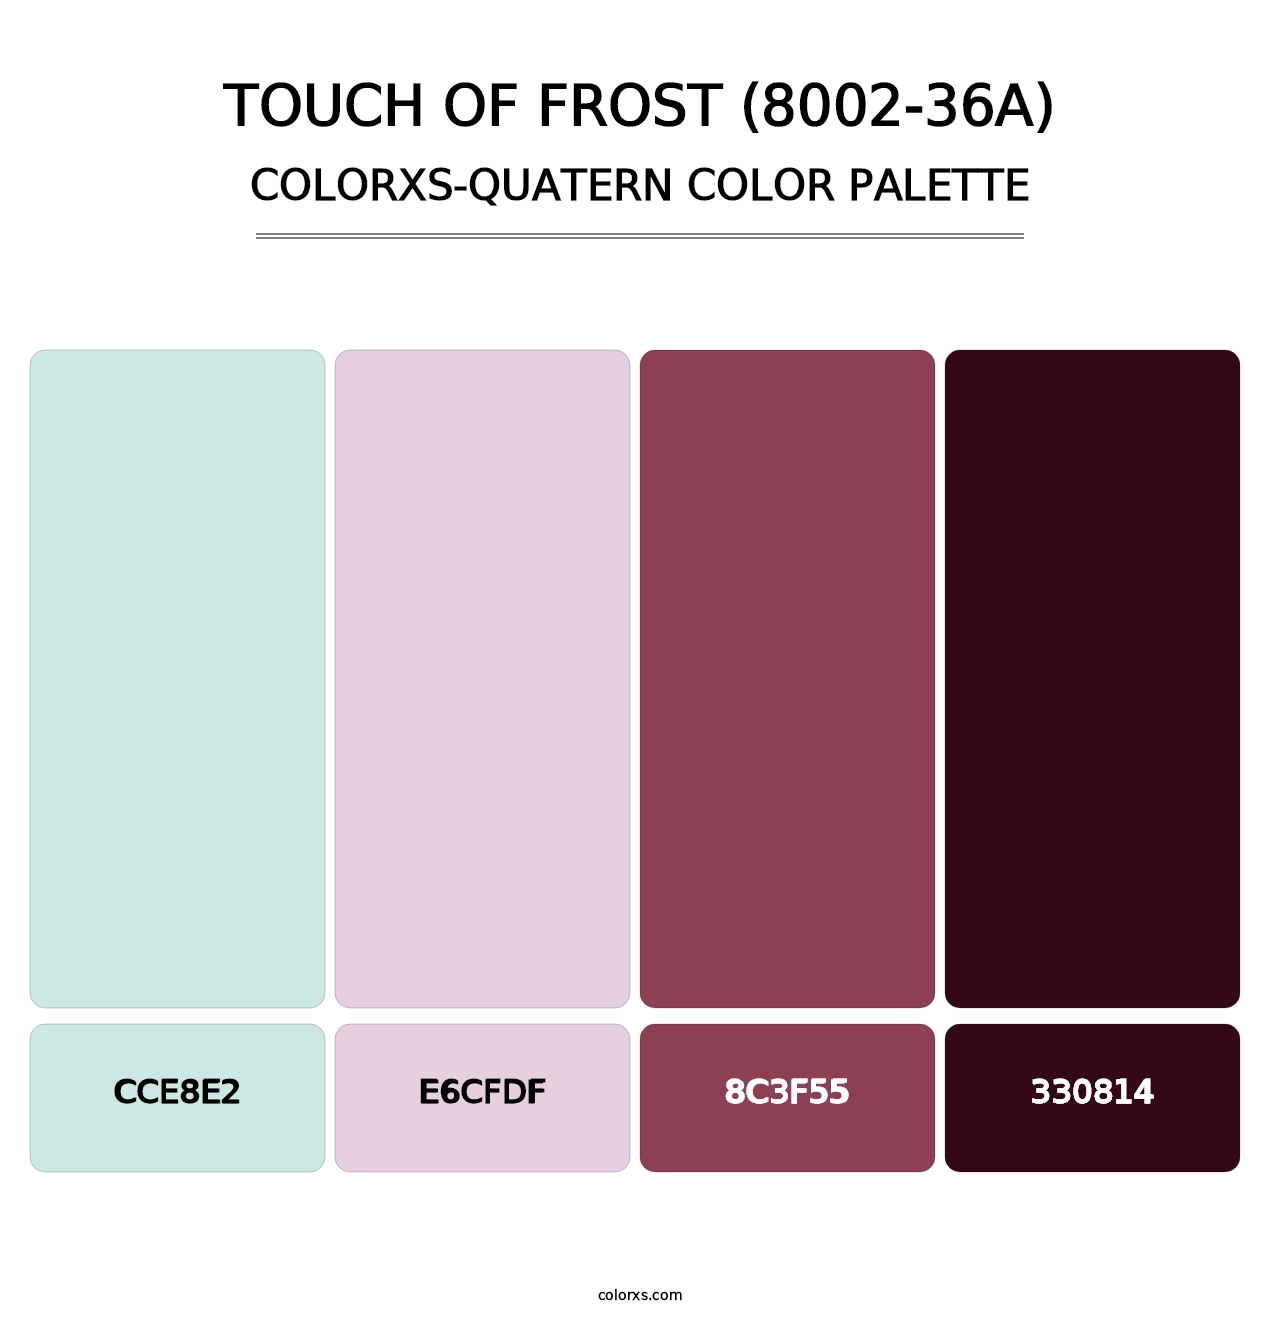 Touch of Frost (8002-36A) - Colorxs Quatern Palette